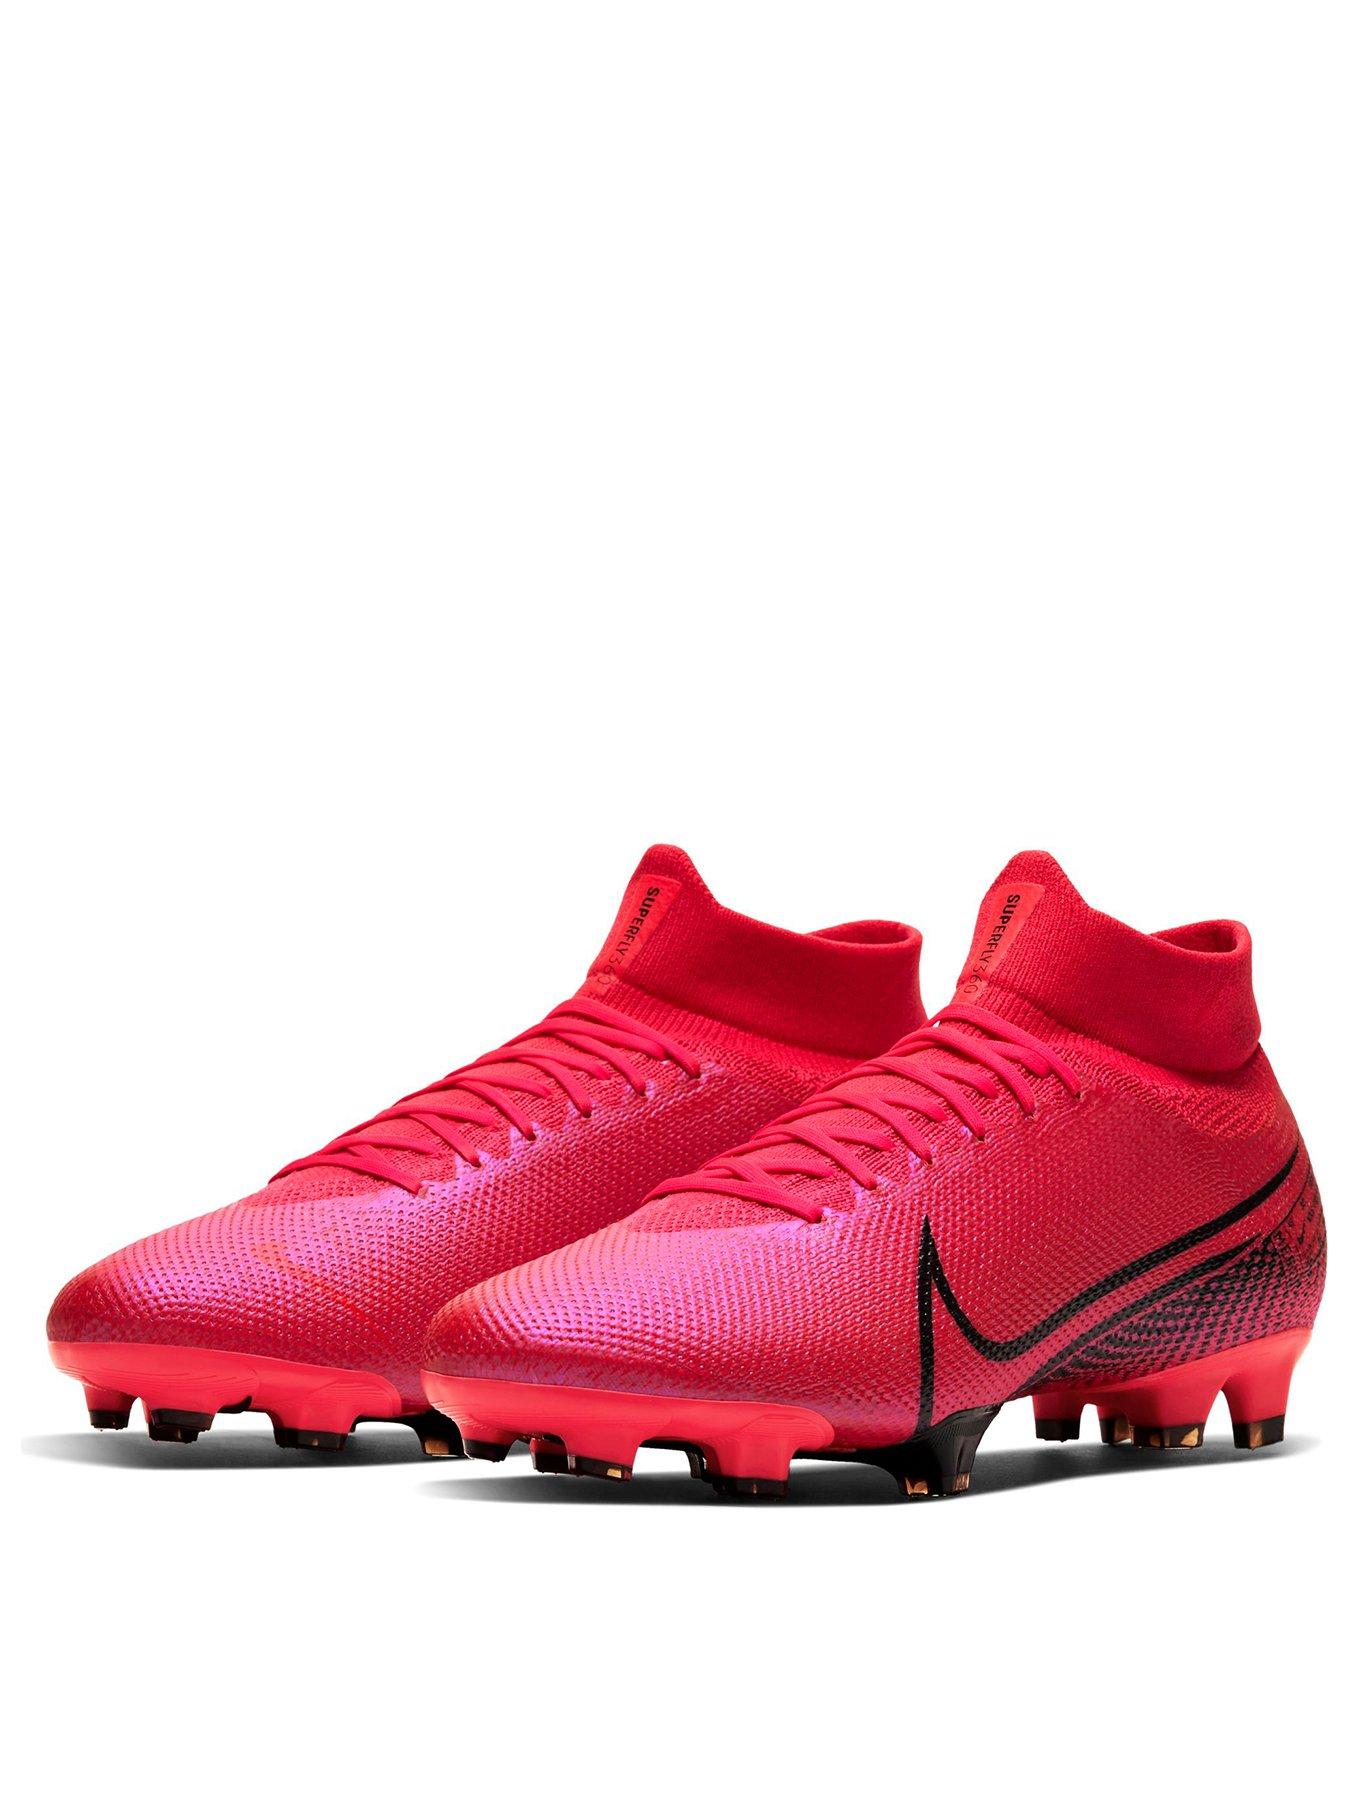 Shoes Nike Mercurial Superfly 6 Academy SG Pro AH7364.